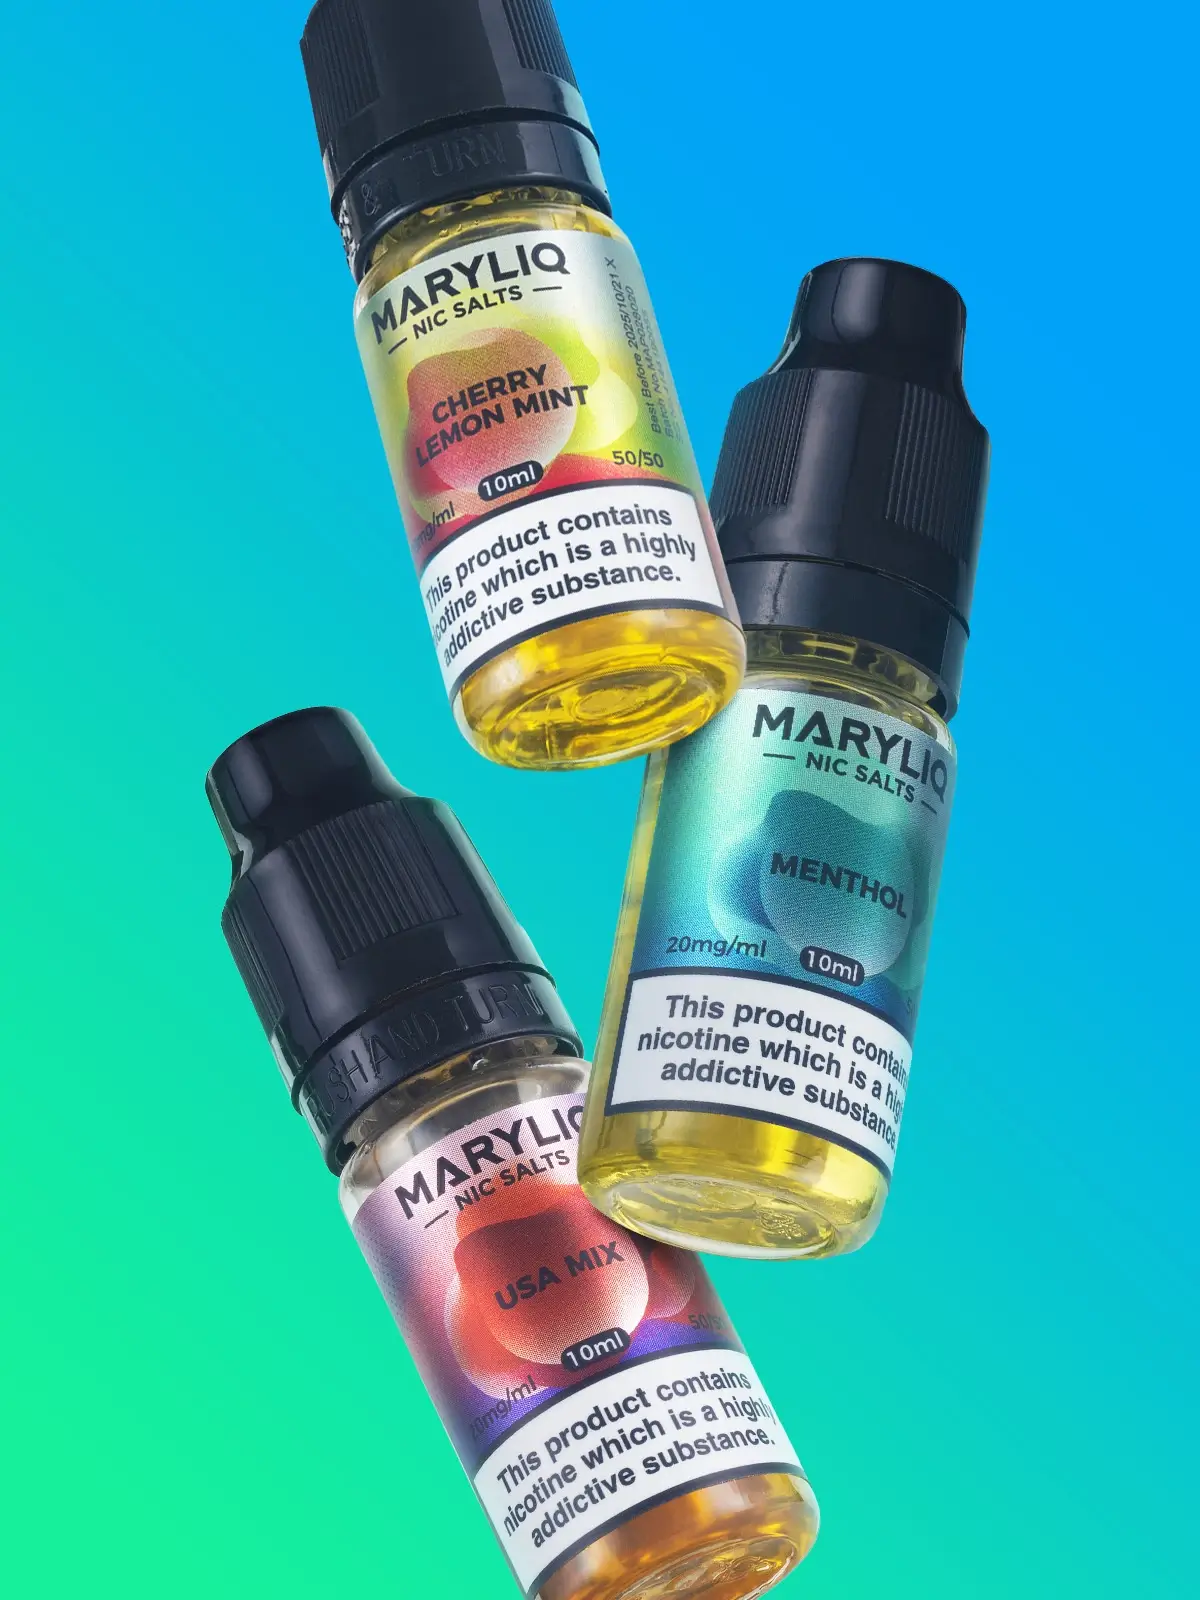 Three bottles of Maryliq e-liquid floating in front of a blue and green background; Cherry Lemon Mint, Menthol and USA Mix